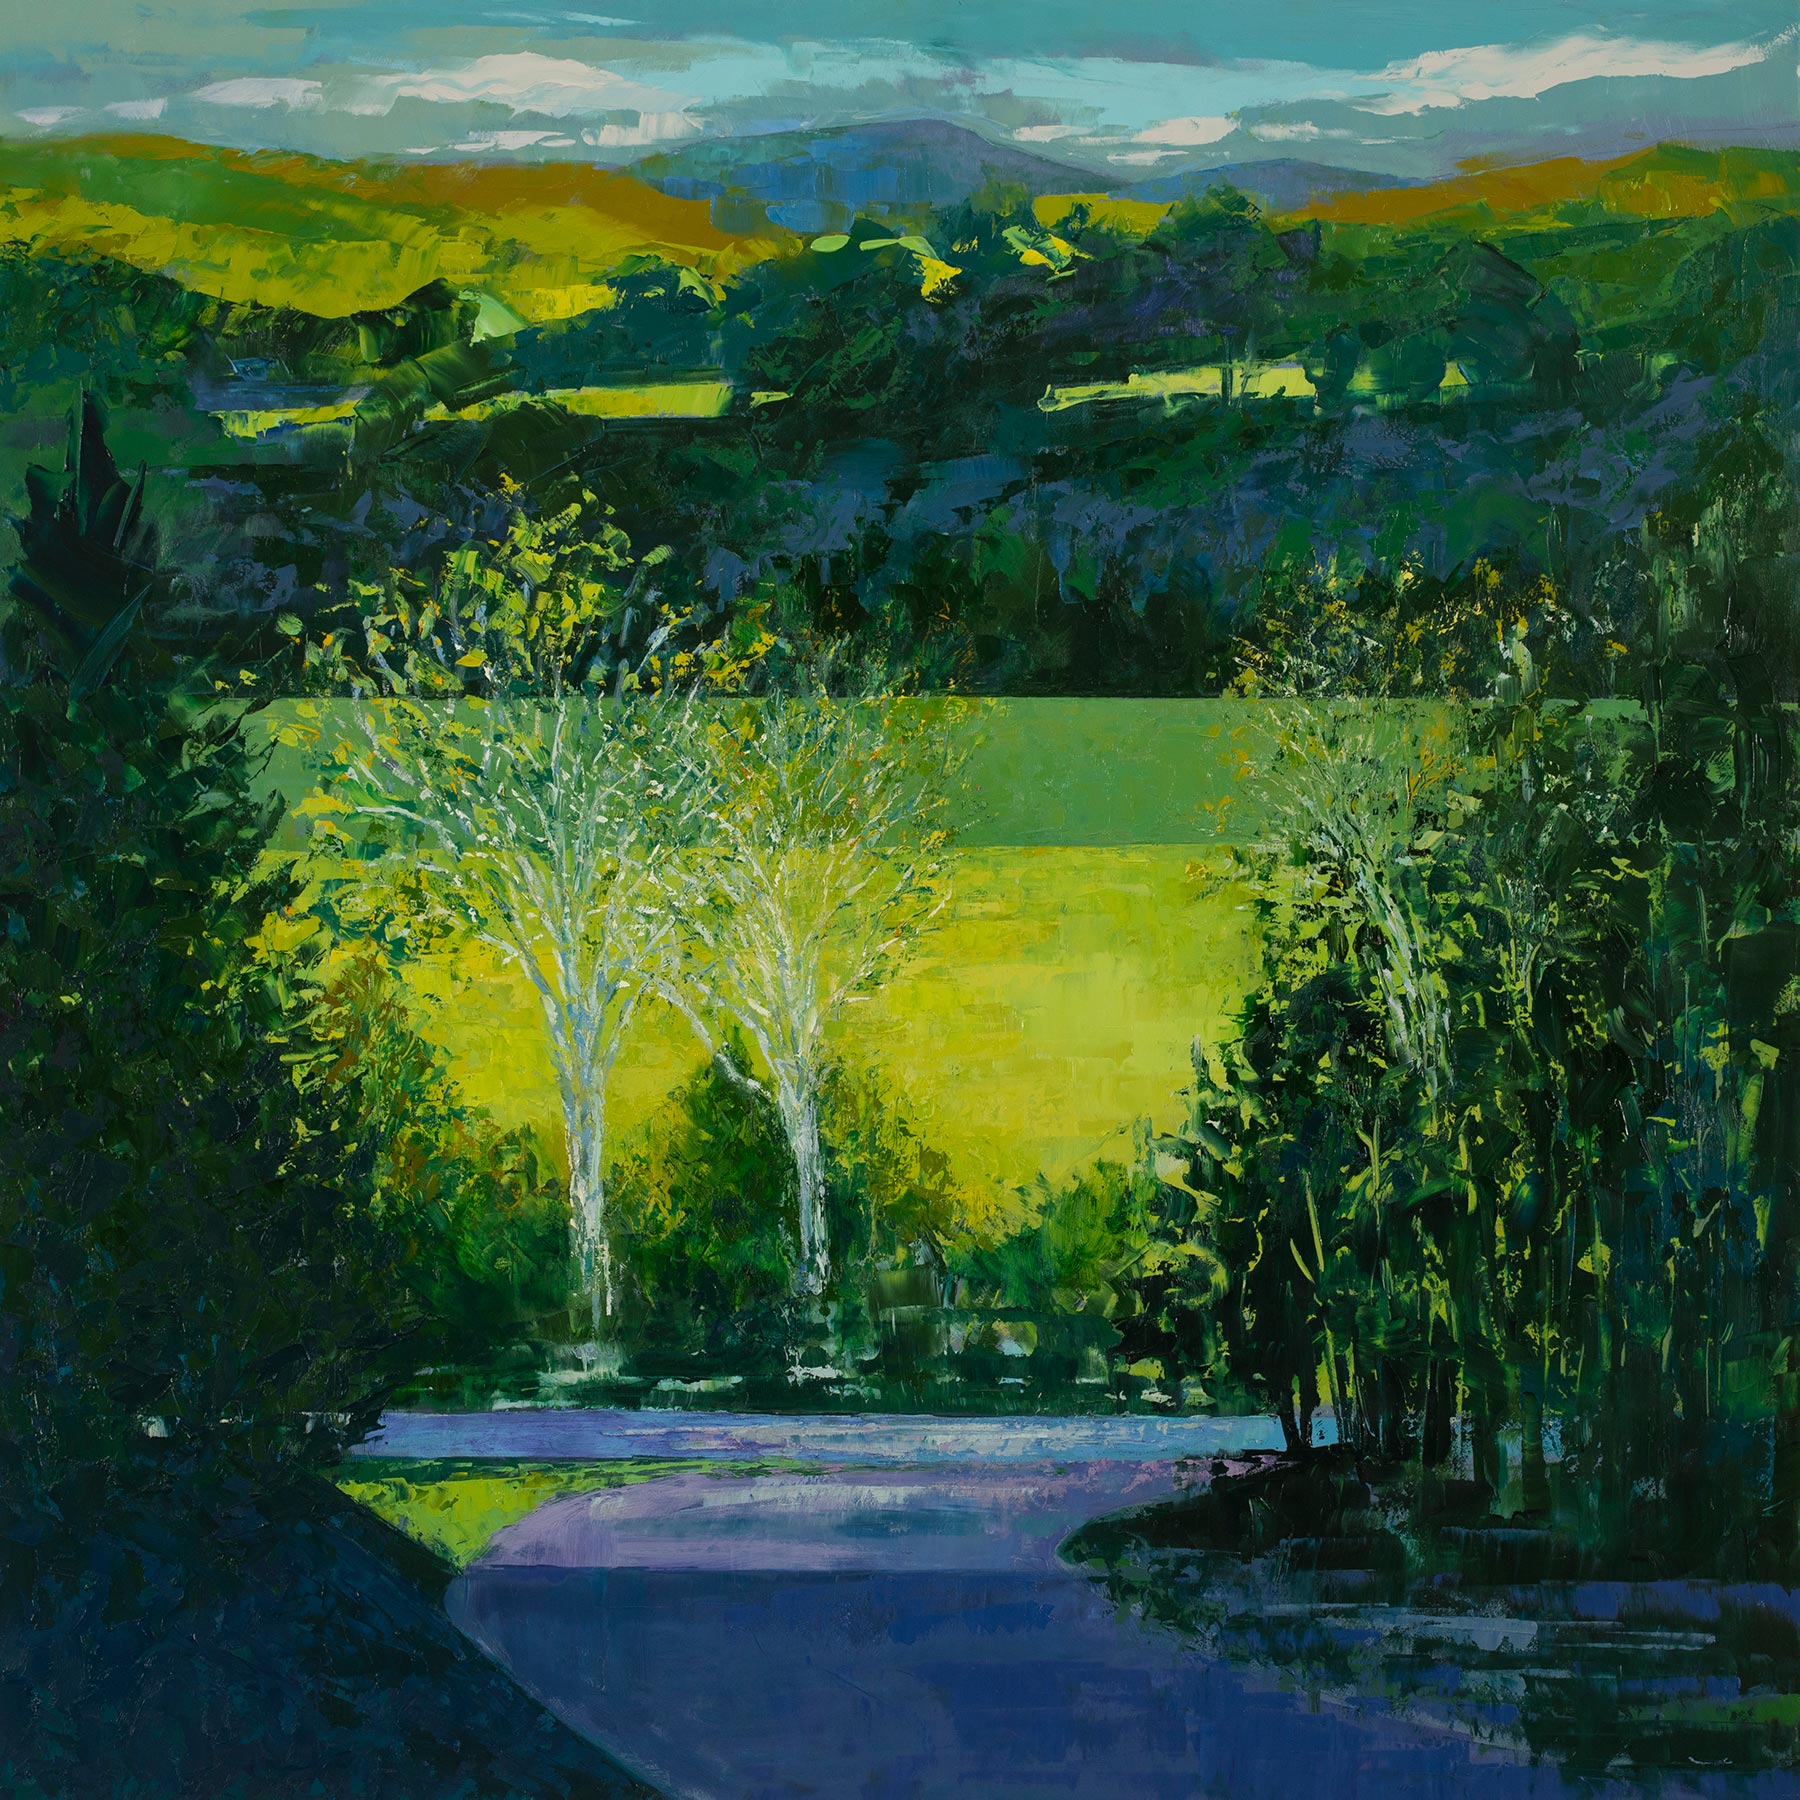 View from the Ridge: Leaning In/Leafing Out, oil on panel, 30 x 30 inches, 2020, SOLD